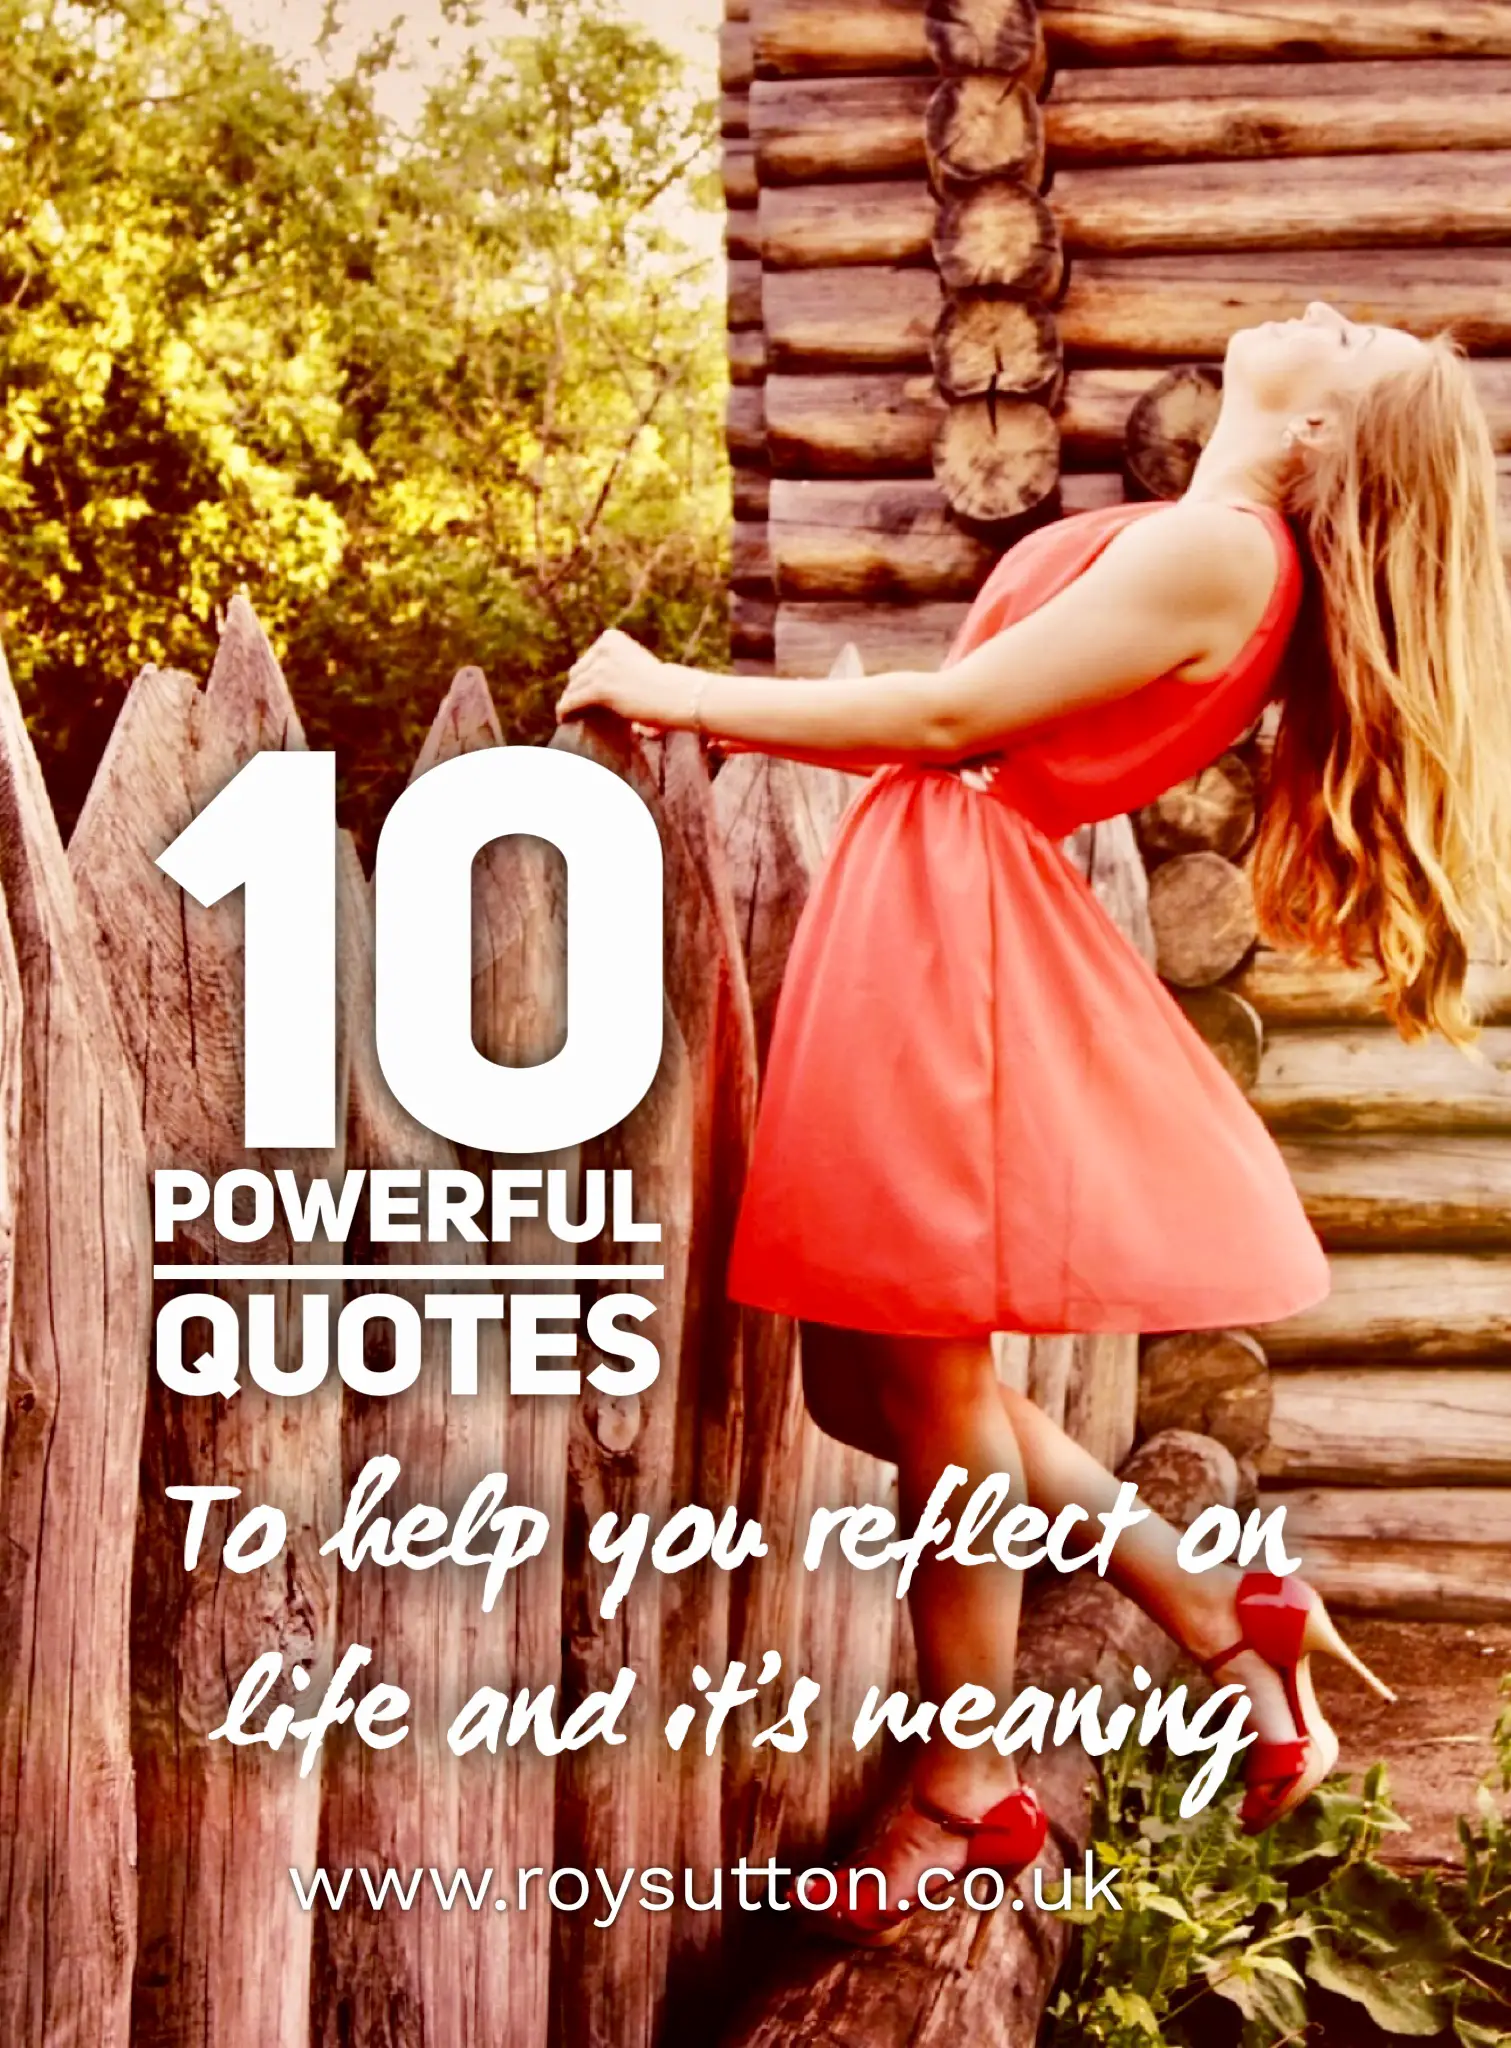 10 powerful quotes to help you reflect on life and its meaning